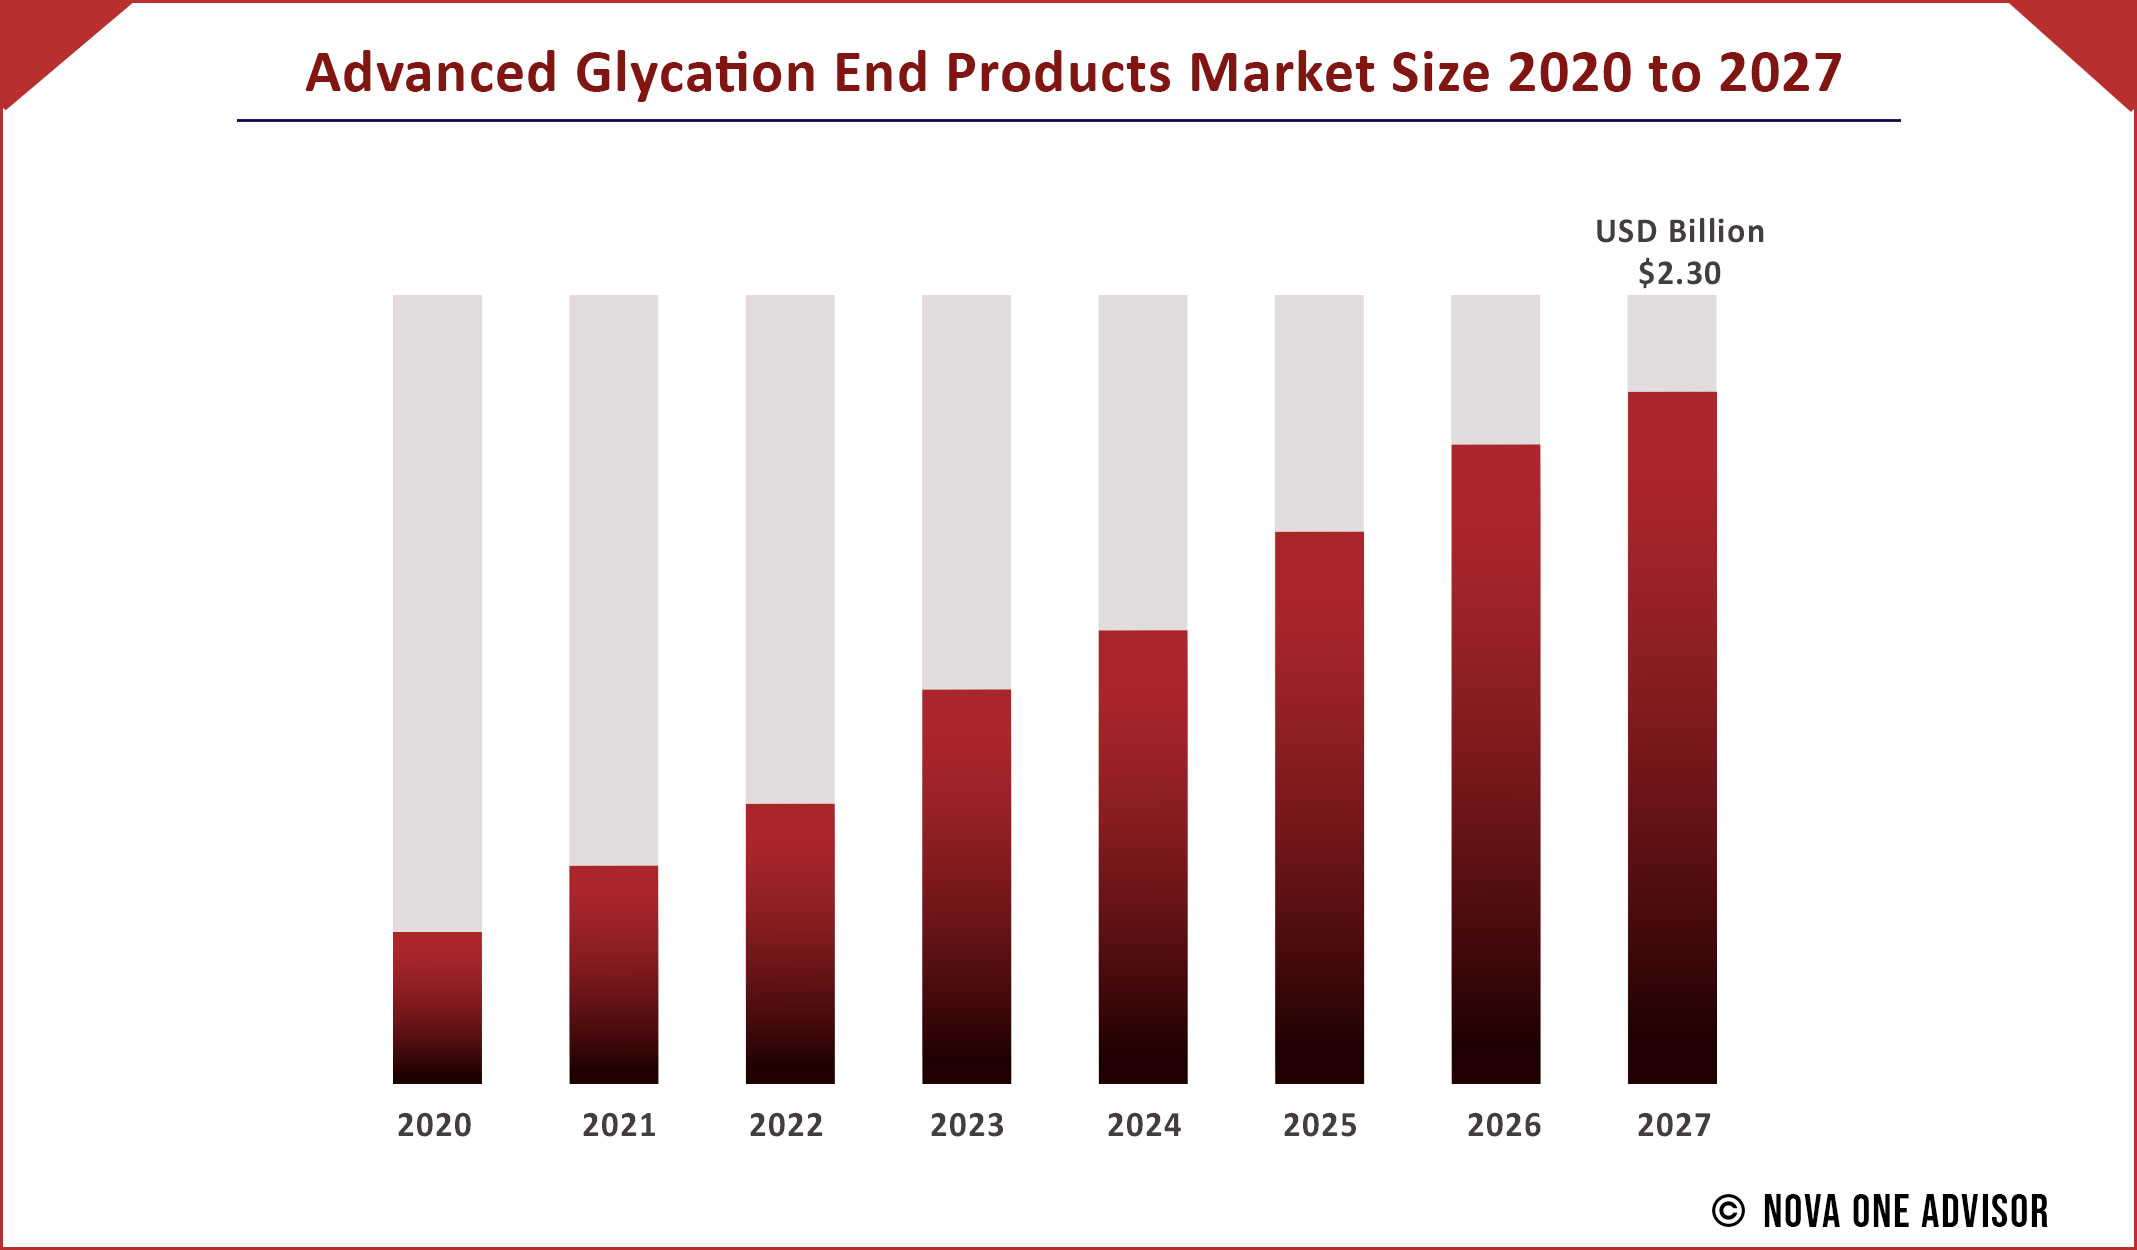 Advanced Glycation End Products Market Size 2020 to 2027